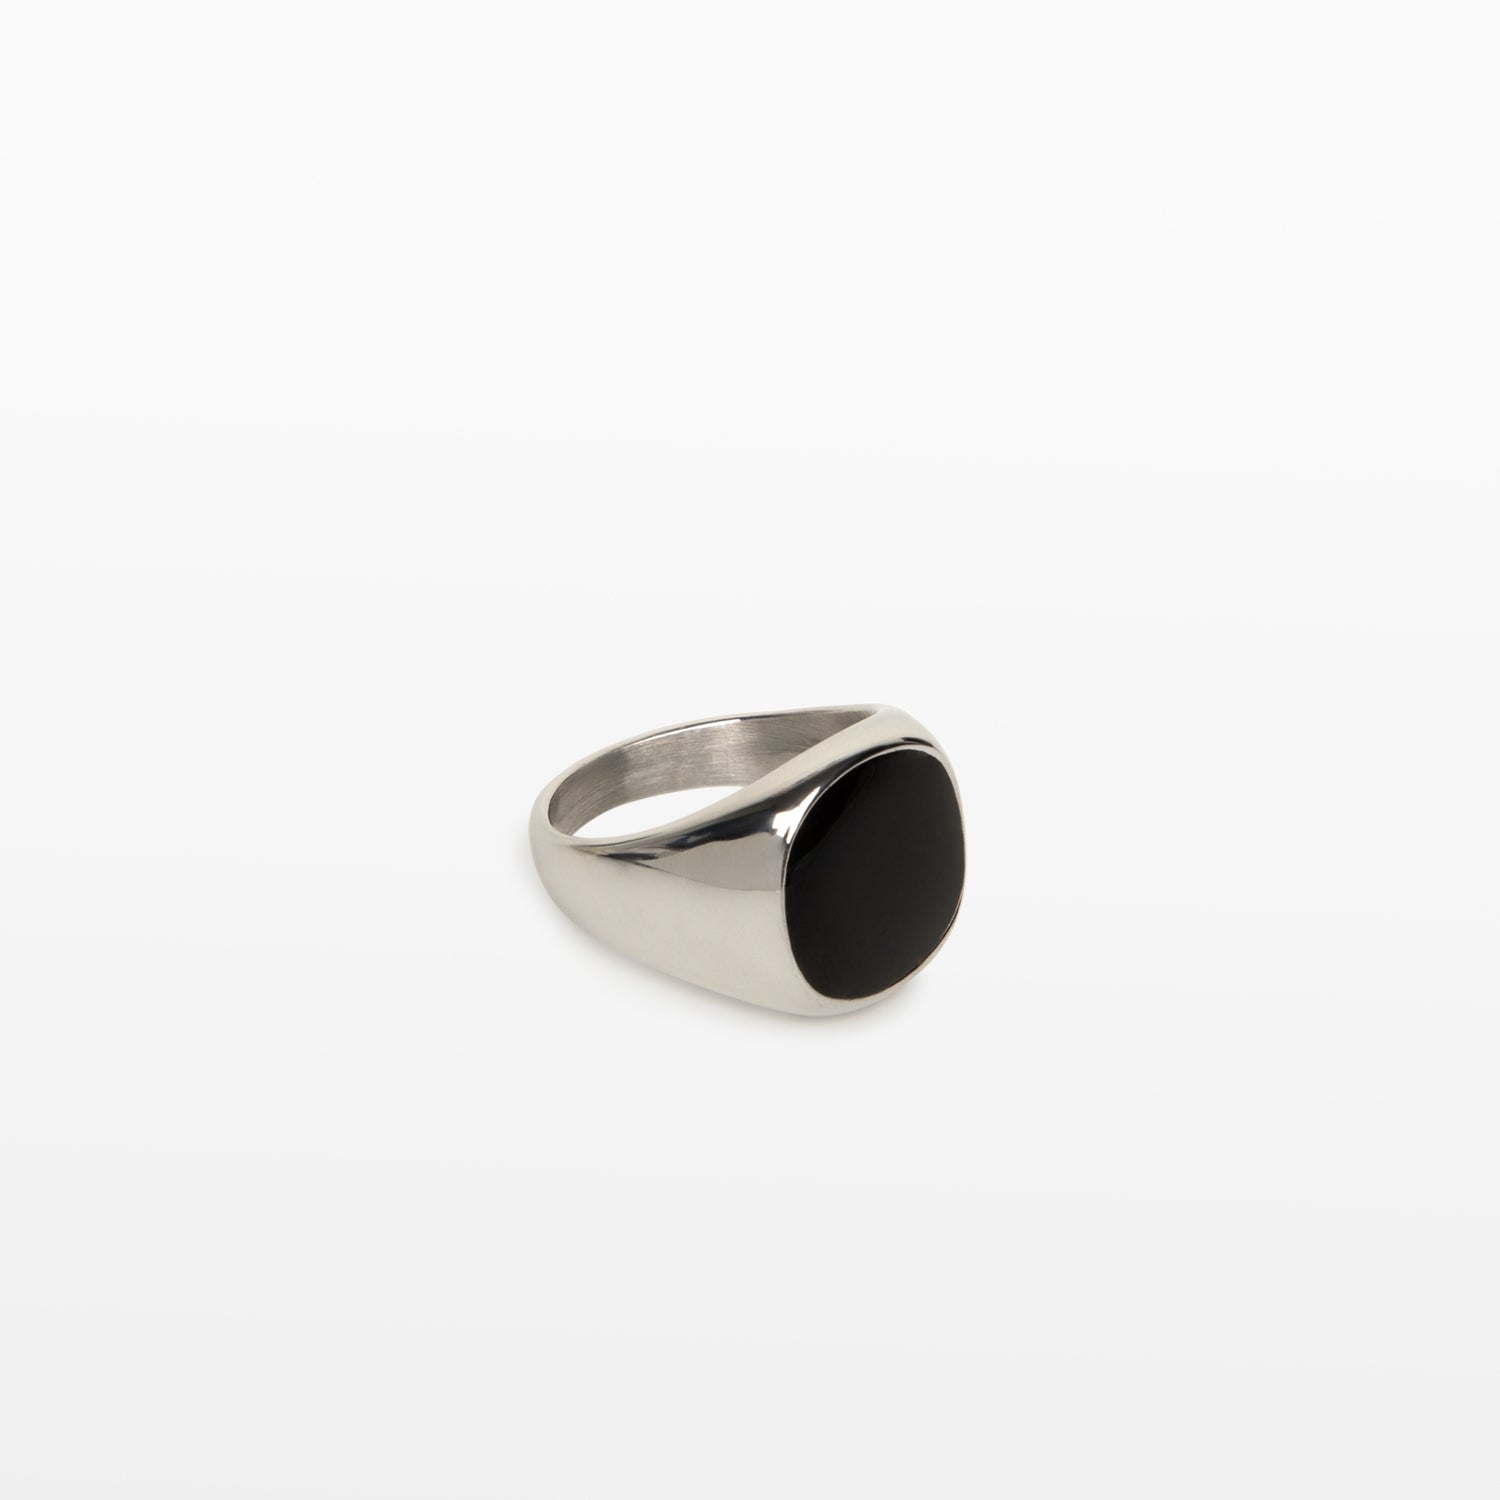 Image of the Black Signet Ring in Silver is crafted with 18K Gold Plating, which is resistant to tarnishing and water damage.